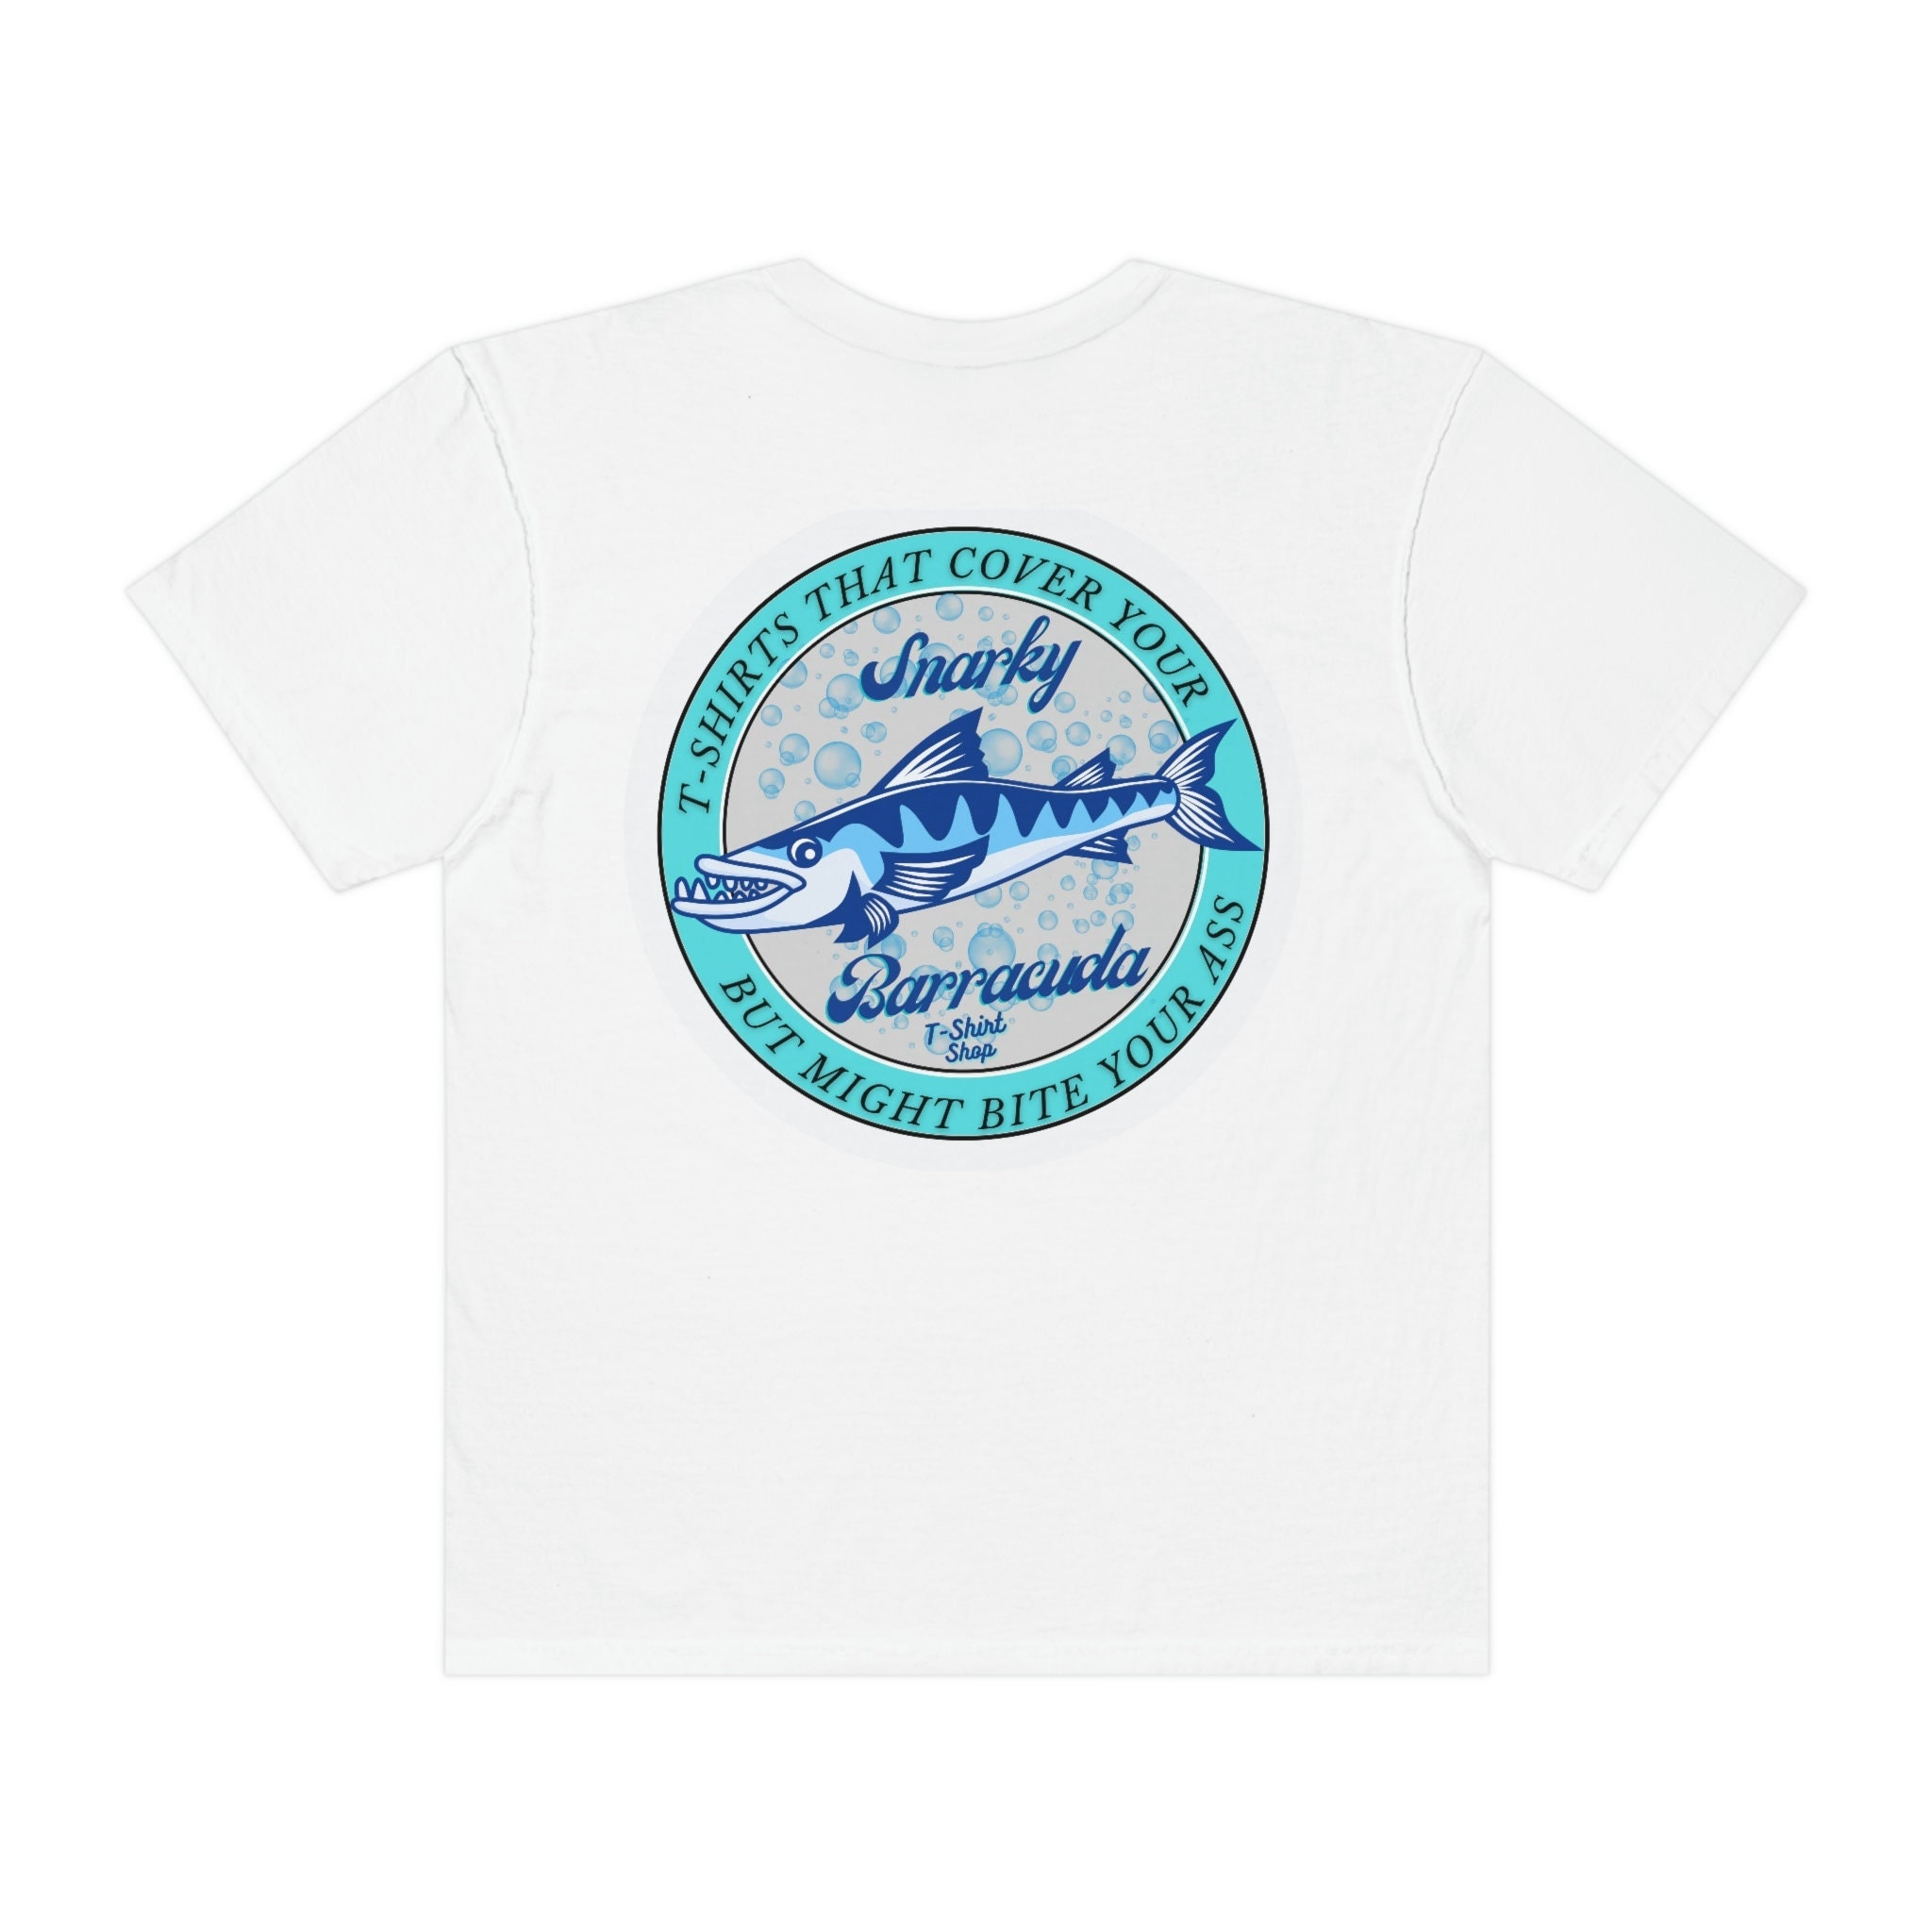  Jersey Style Barracuda 67 1967 Old School Muscle Car Fishing  T-Shirt : Clothing, Shoes & Jewelry